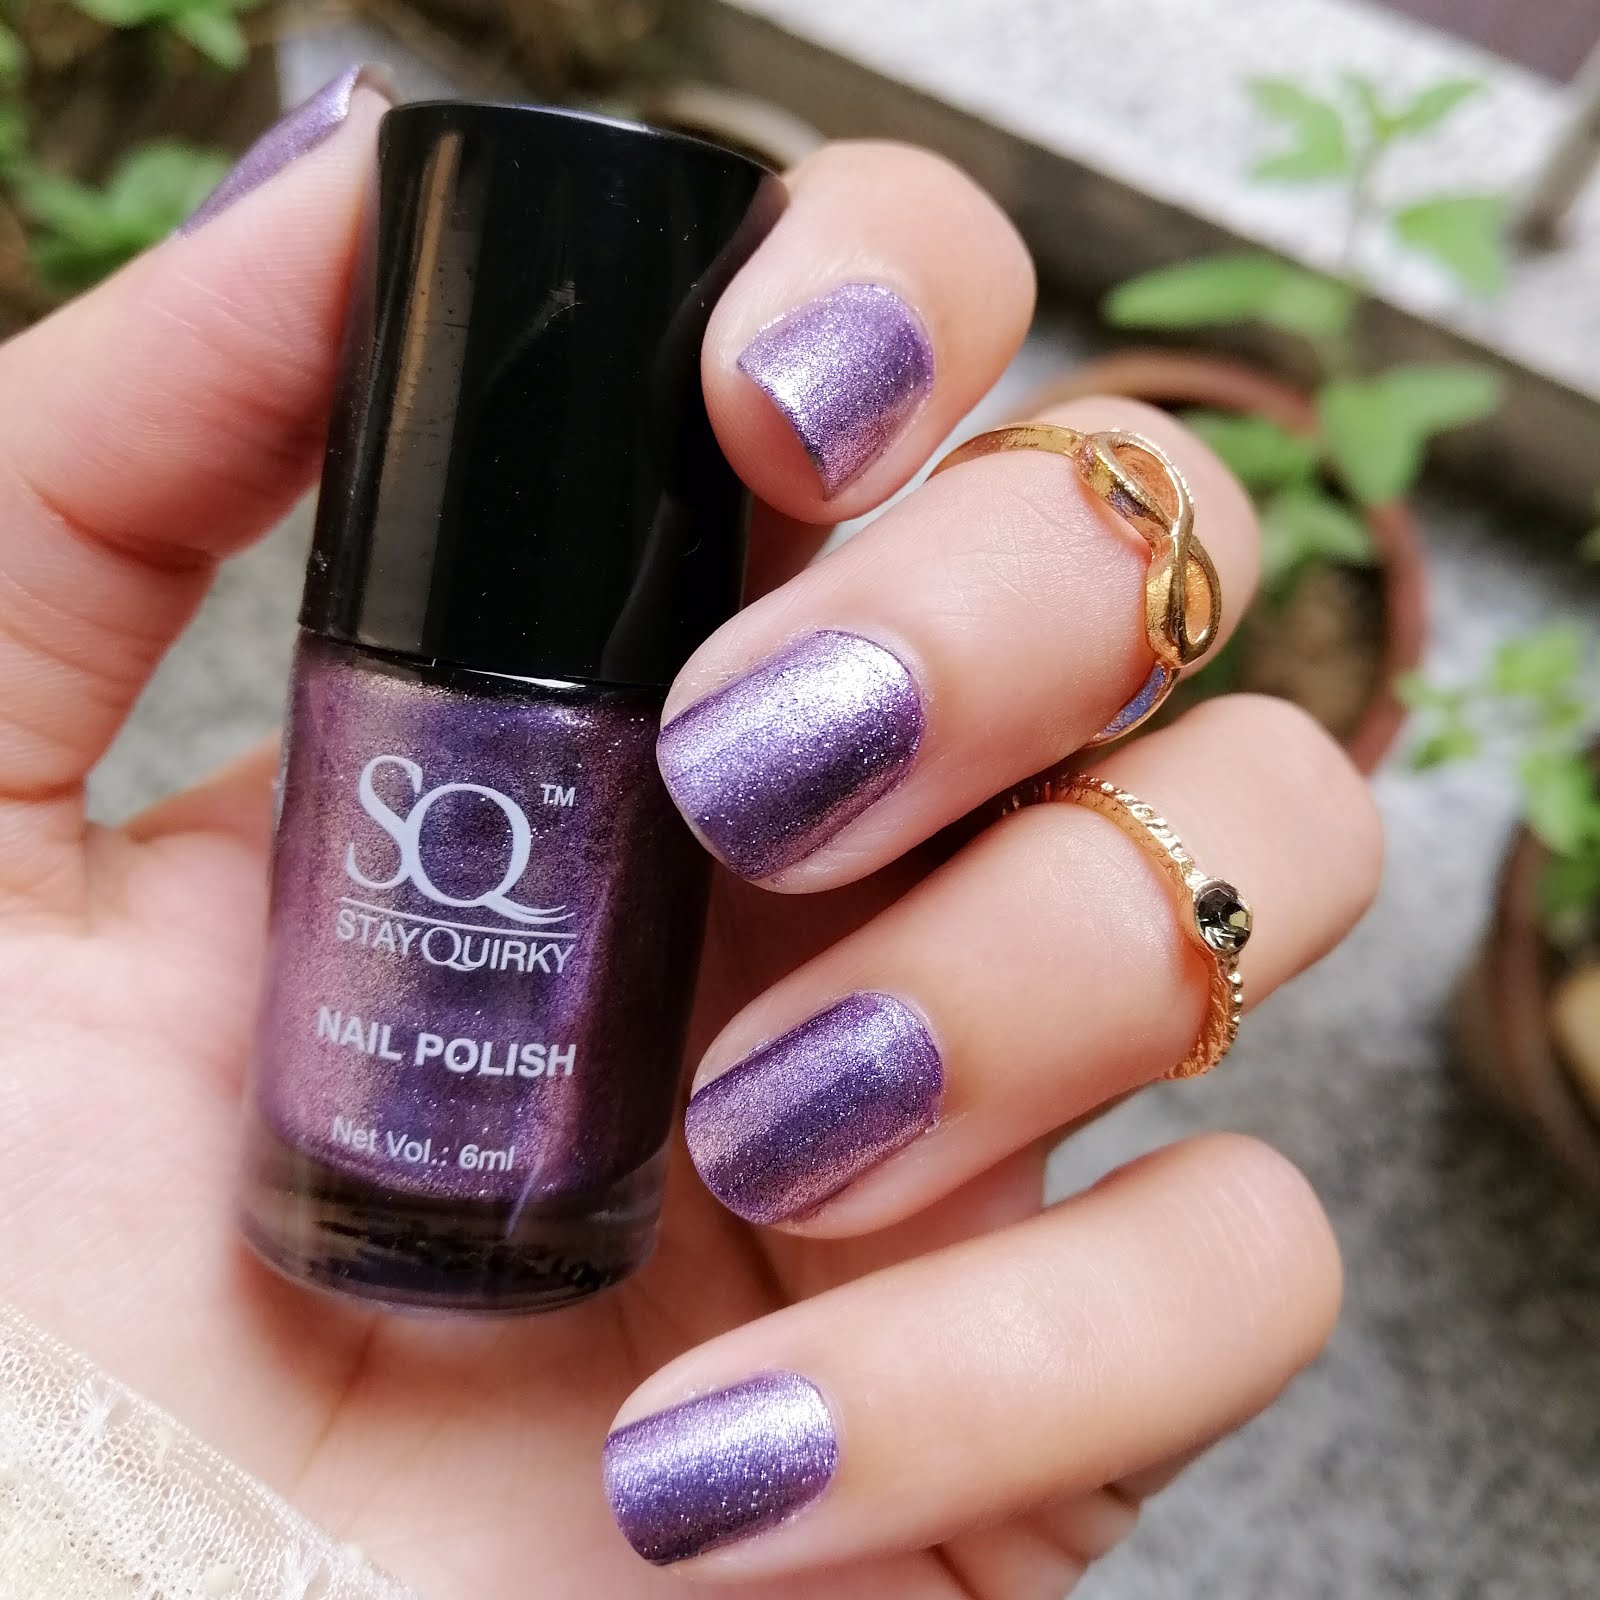 Stay Quirky Nail Polishes Swatches & Review + Nail Art